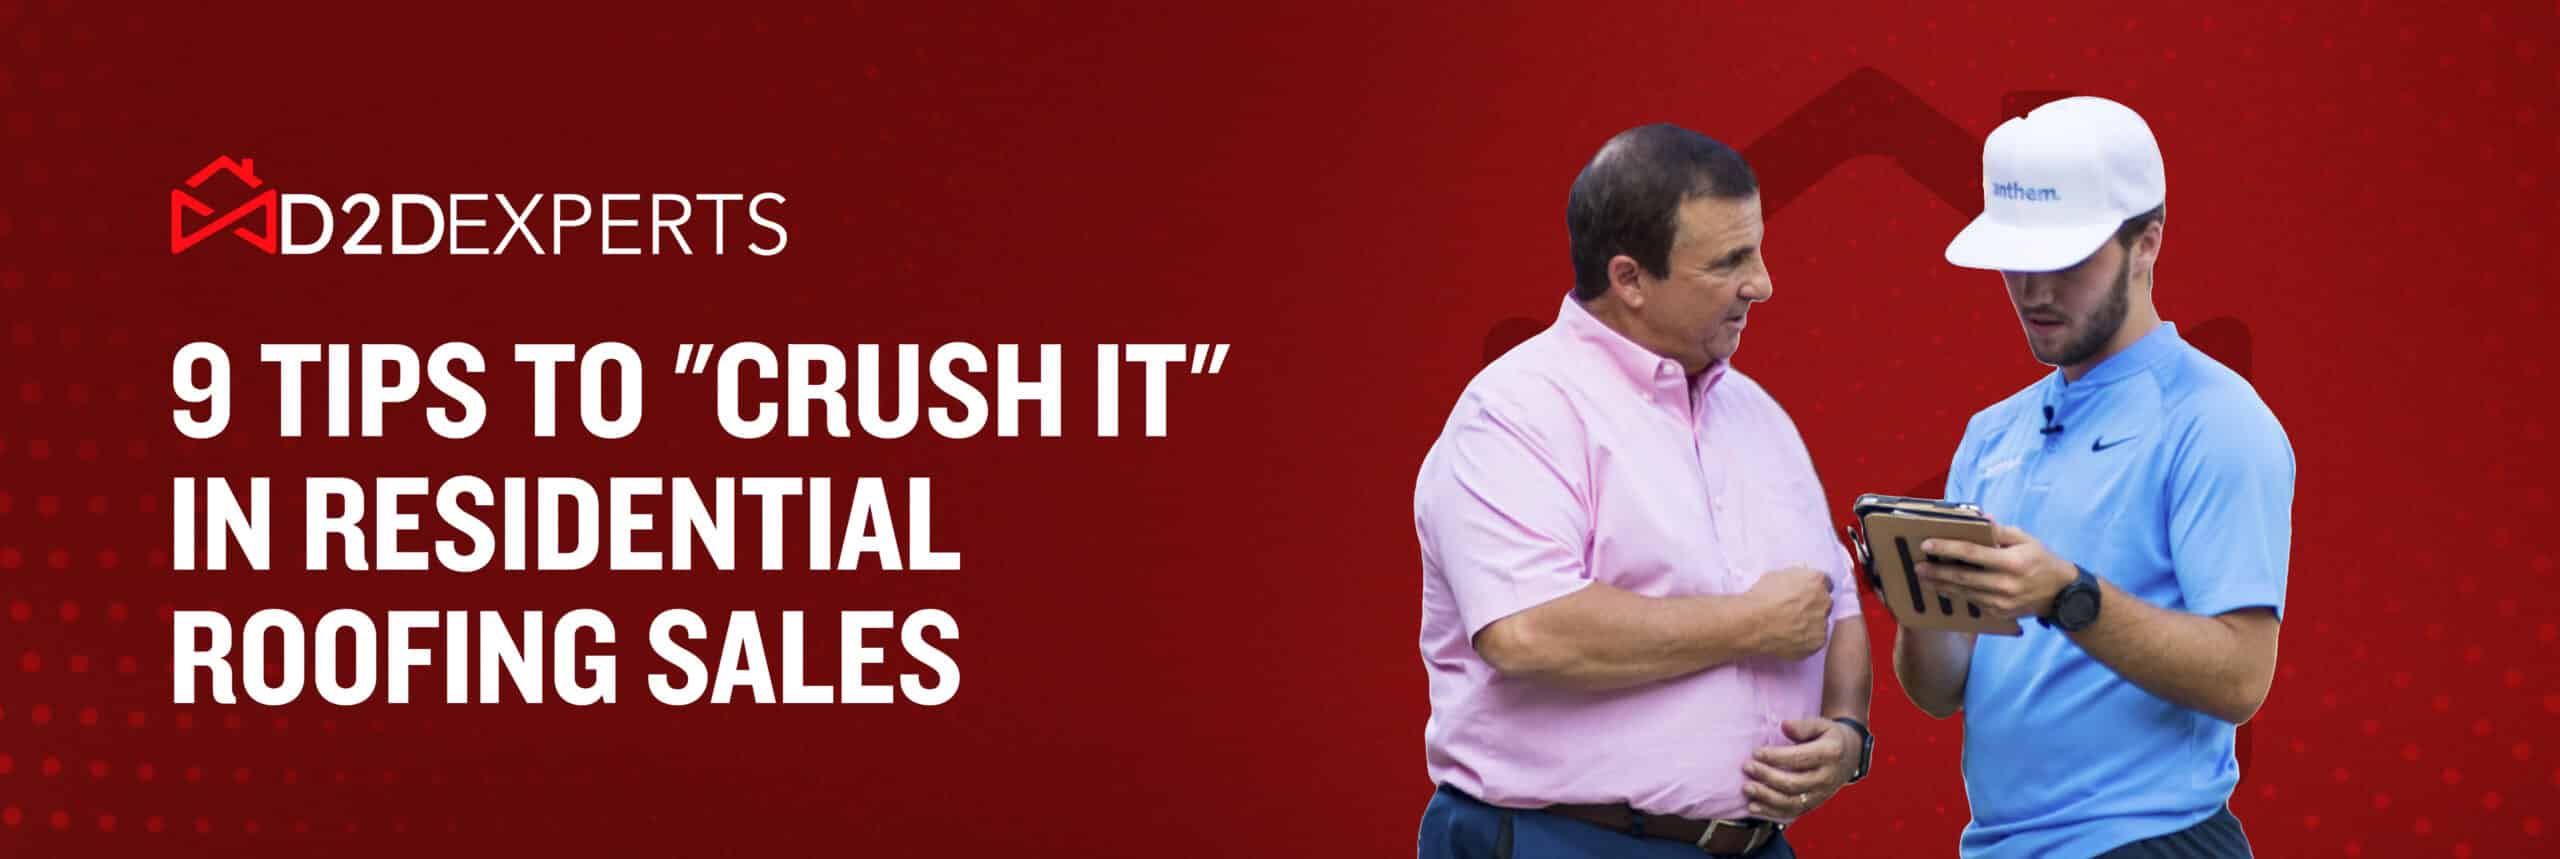 Two professionals discuss strategies on a digital tablet against a red backdrop with text offering "9 tips to 'crush it' in residential roofing sales.